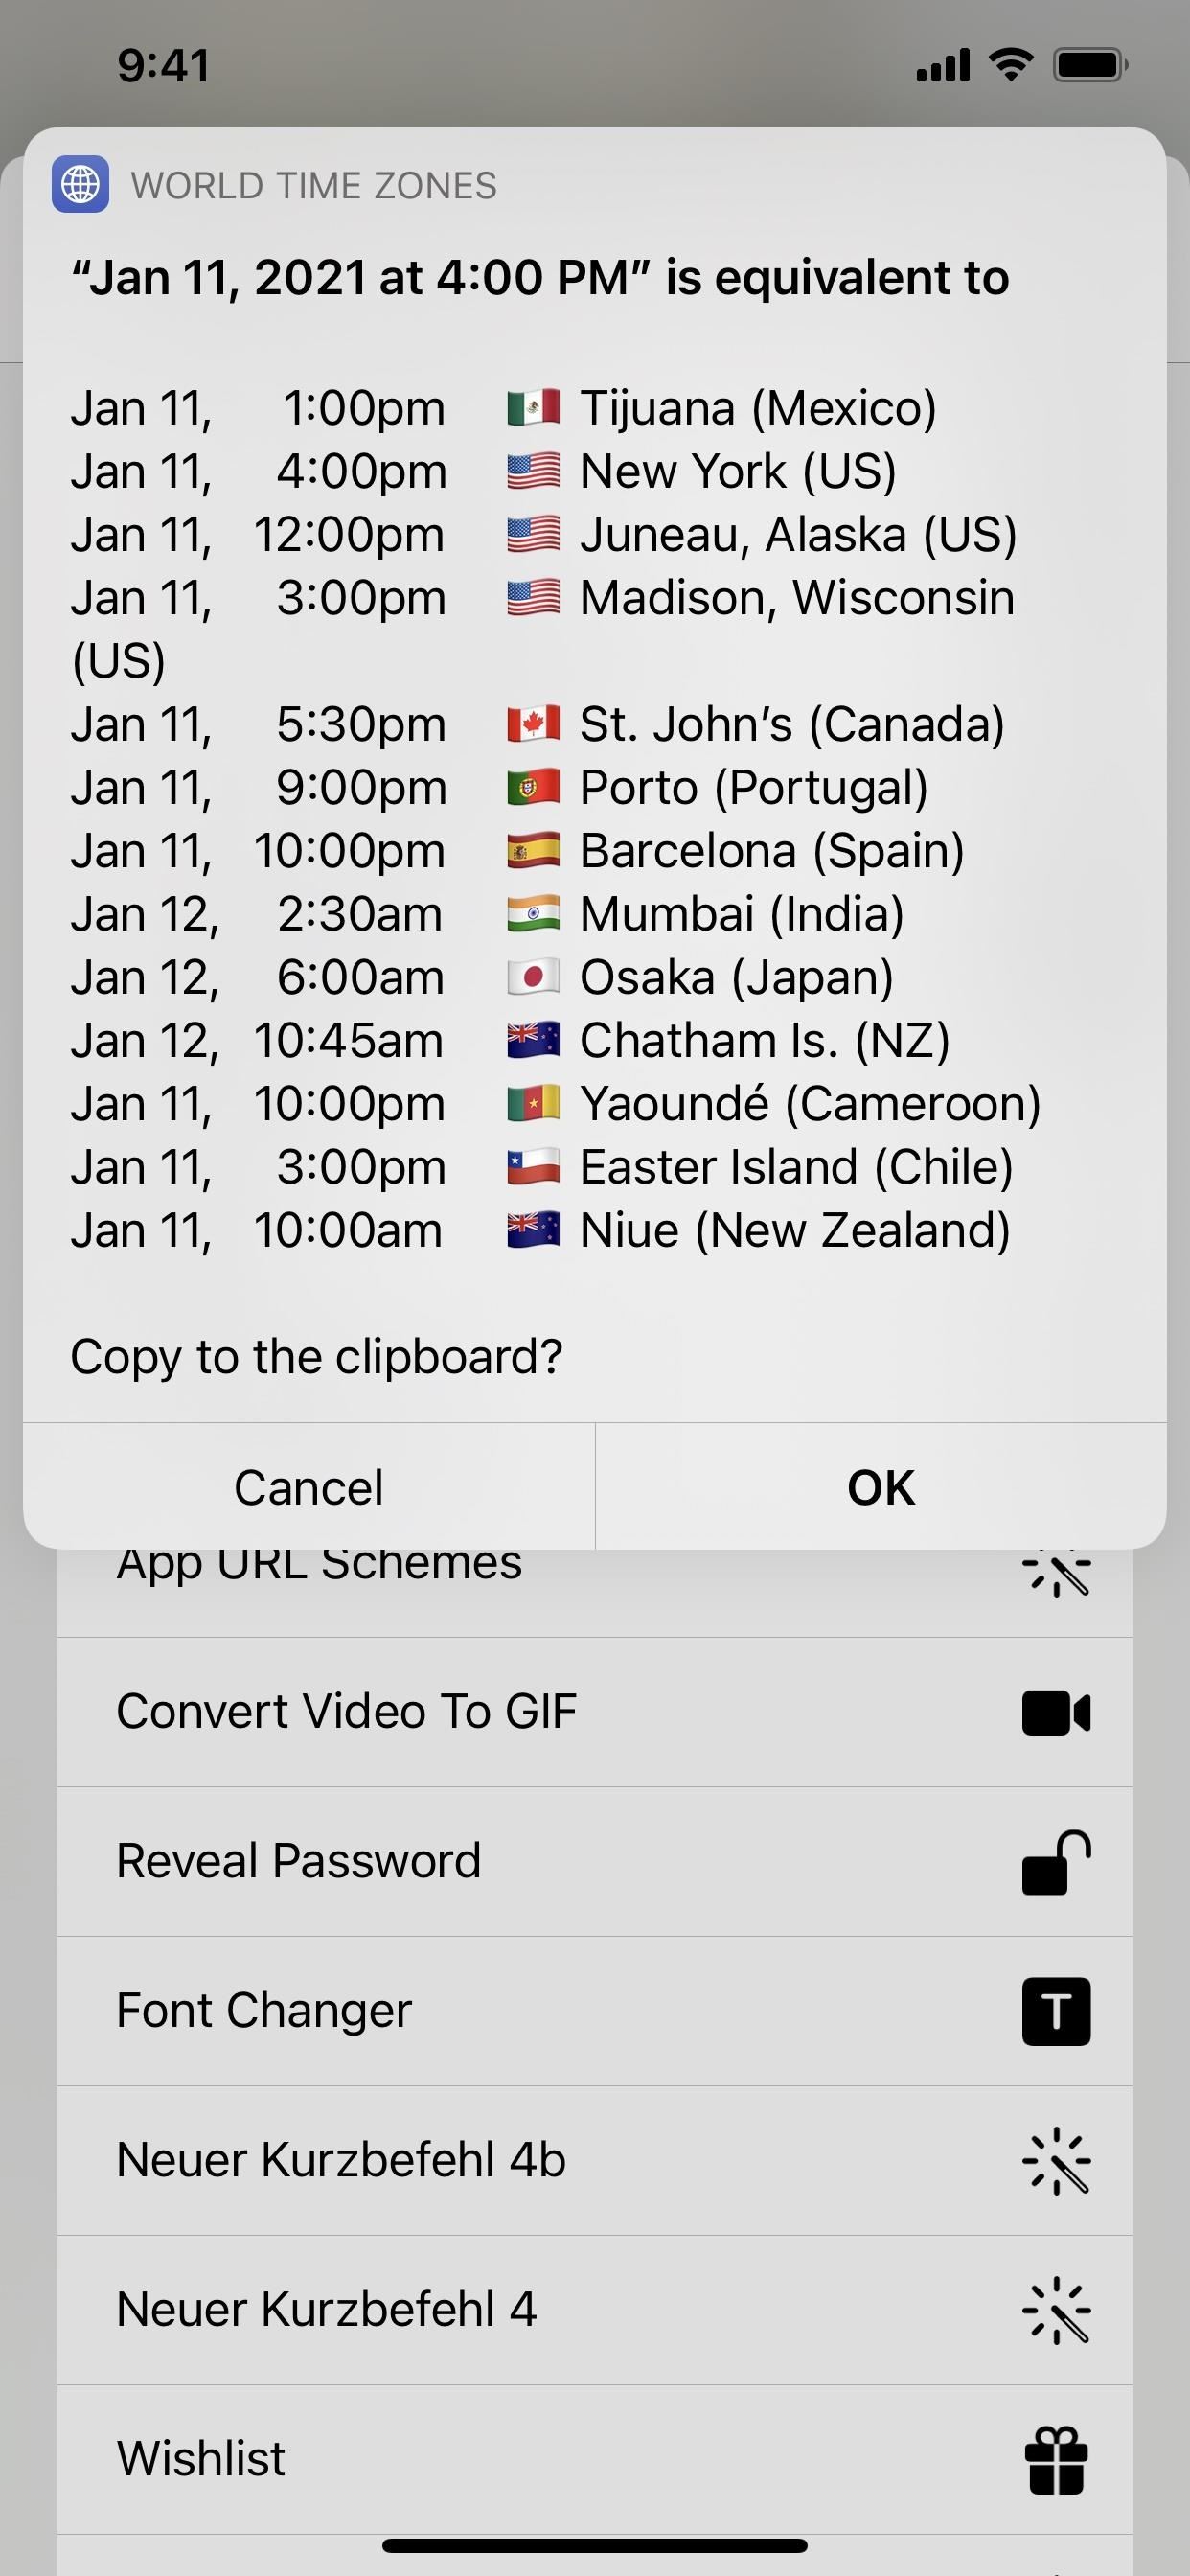 Convert Dates & Times to Different Time Zones on iOS Without Leaving the App You're In